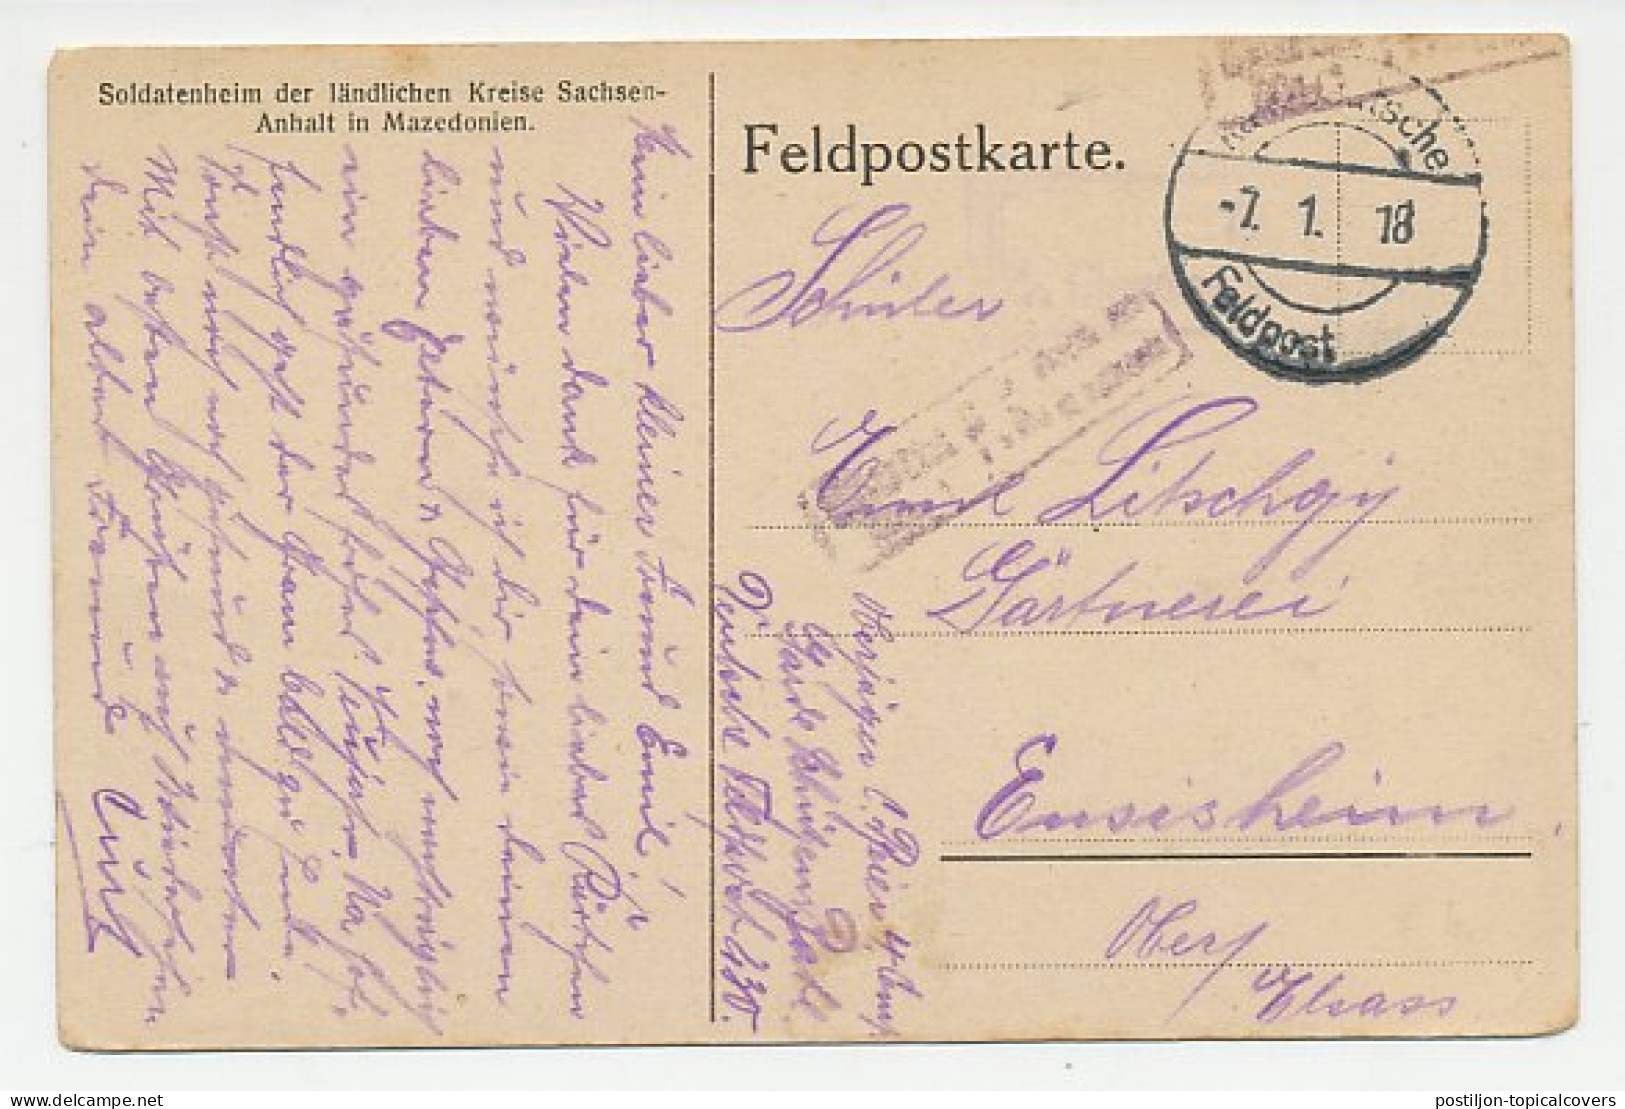 Fieldpost Postcard Germany / Macedonia 1918 Soldier S Home - Macedonia - WWI - WW1 (I Guerra Mundial)